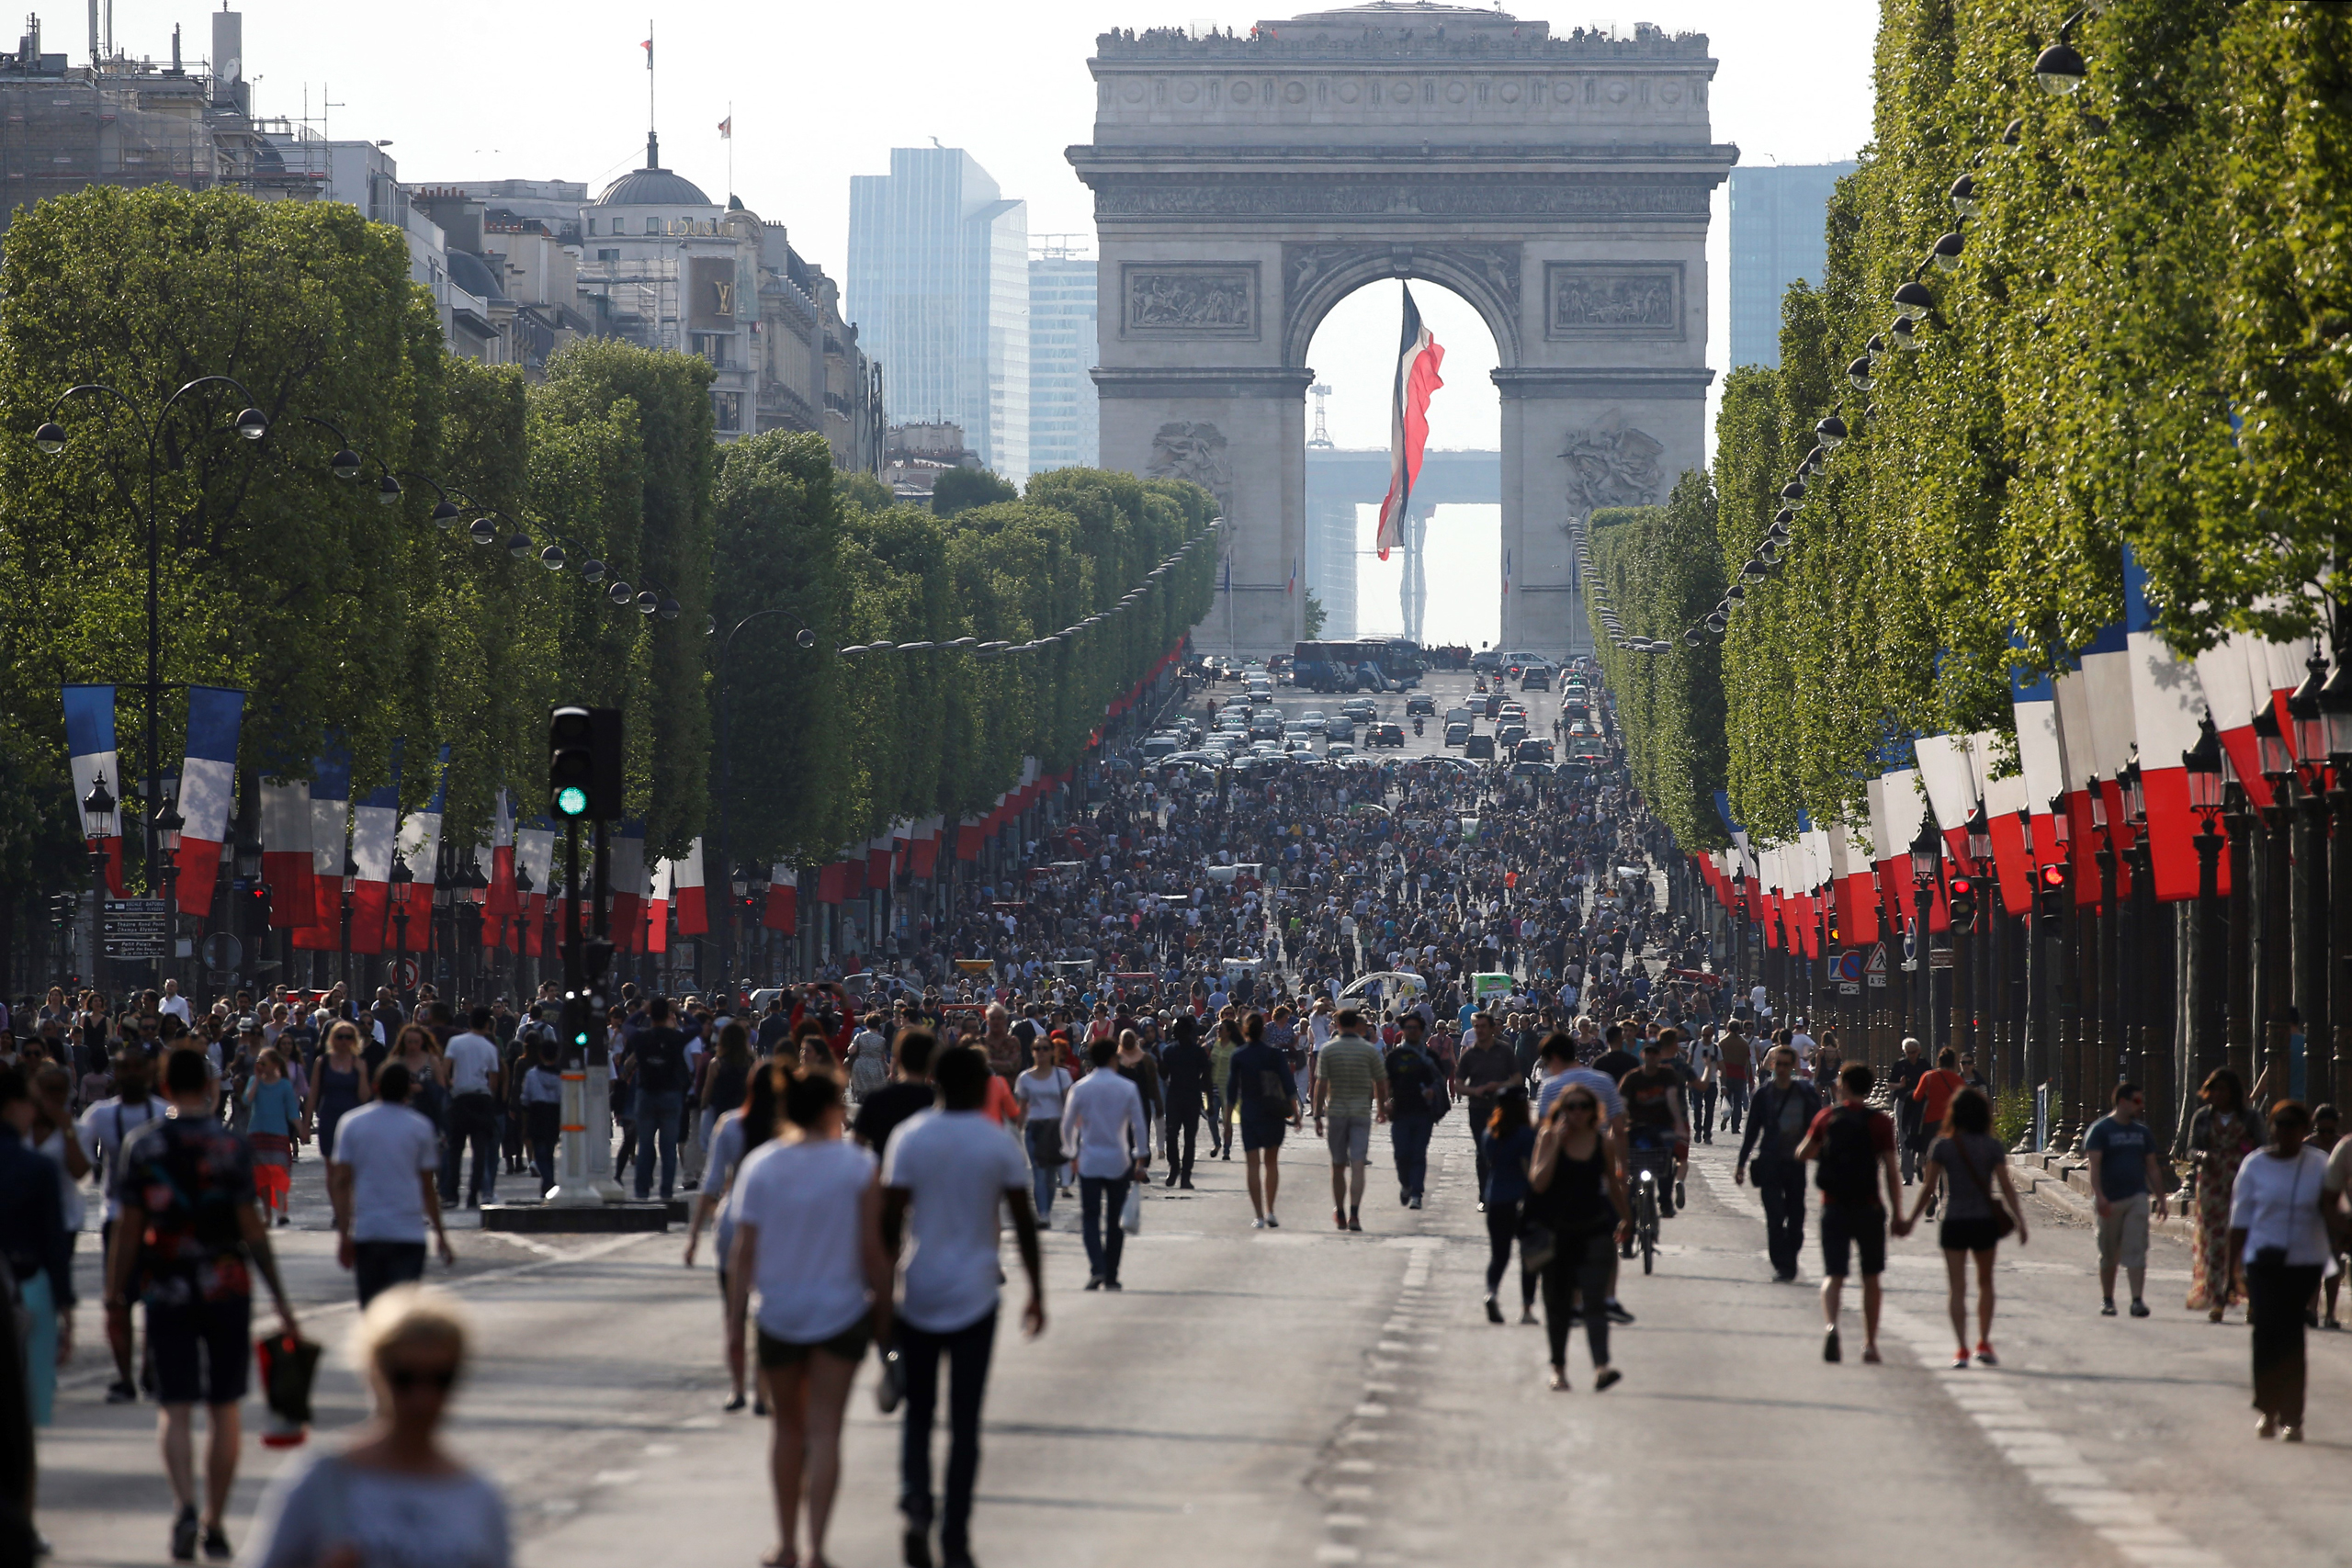 People walk along the Champs Elysees Avenue in Paris on May 8, 2016. (Thomas Samson—AFP/Getty Images)